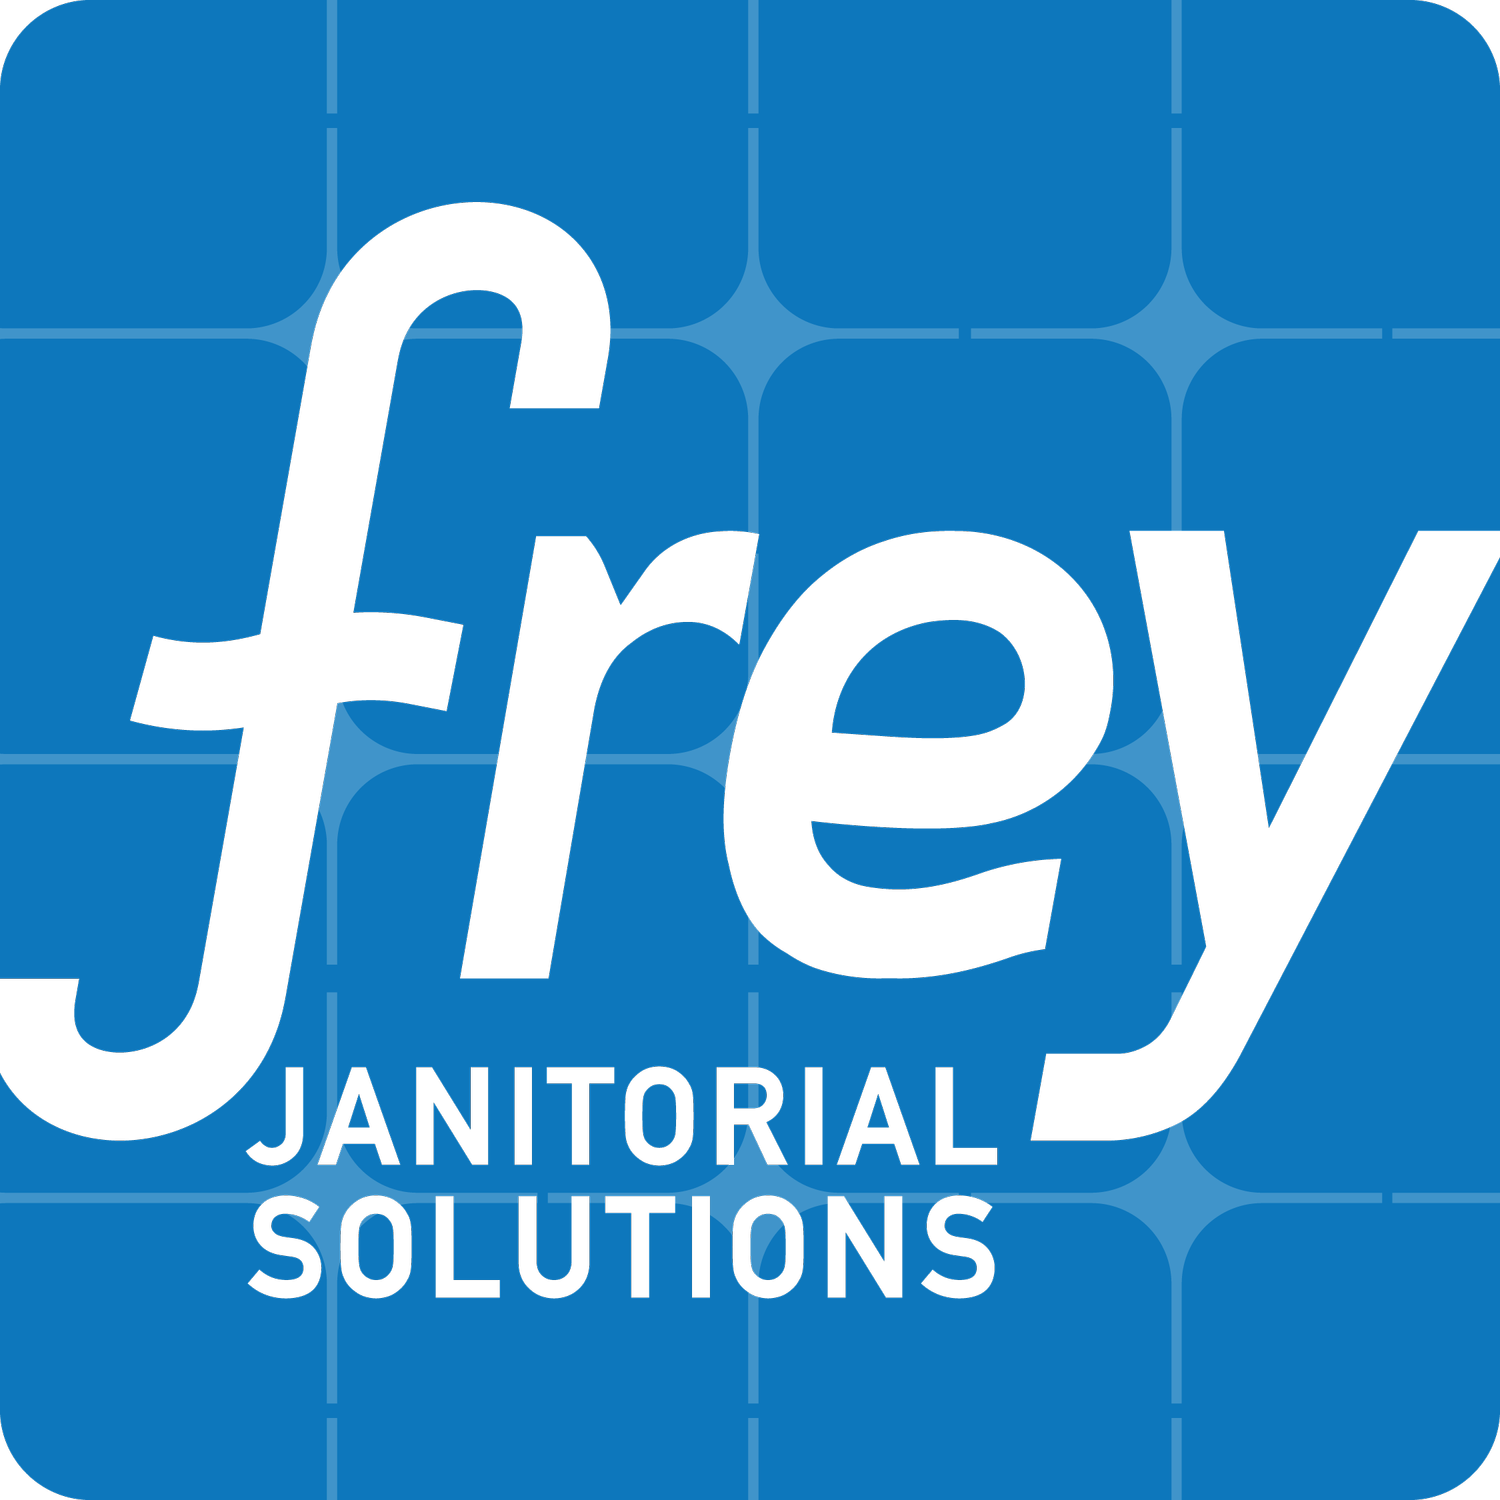 Frey Janitorial Solutions